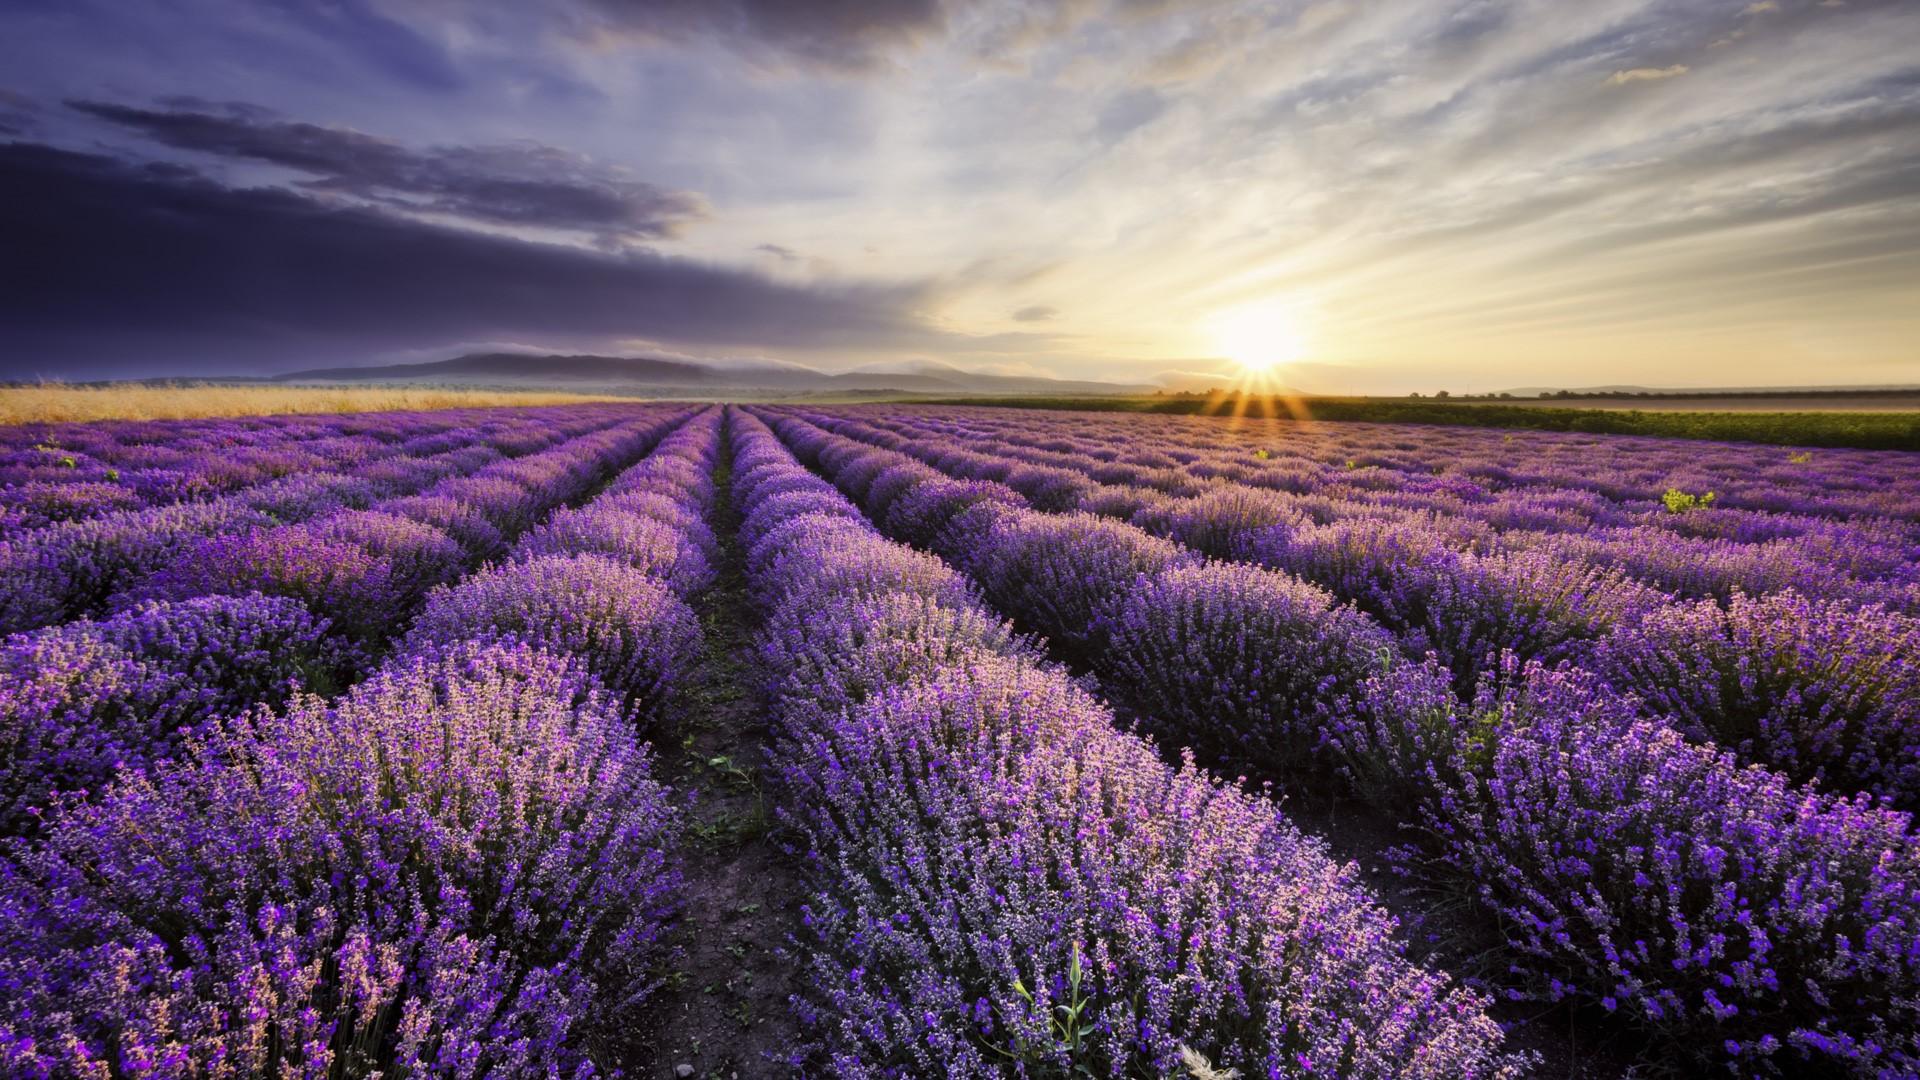 Sunrise and dramatic clouds over lavender field, Bulgaria. Windows